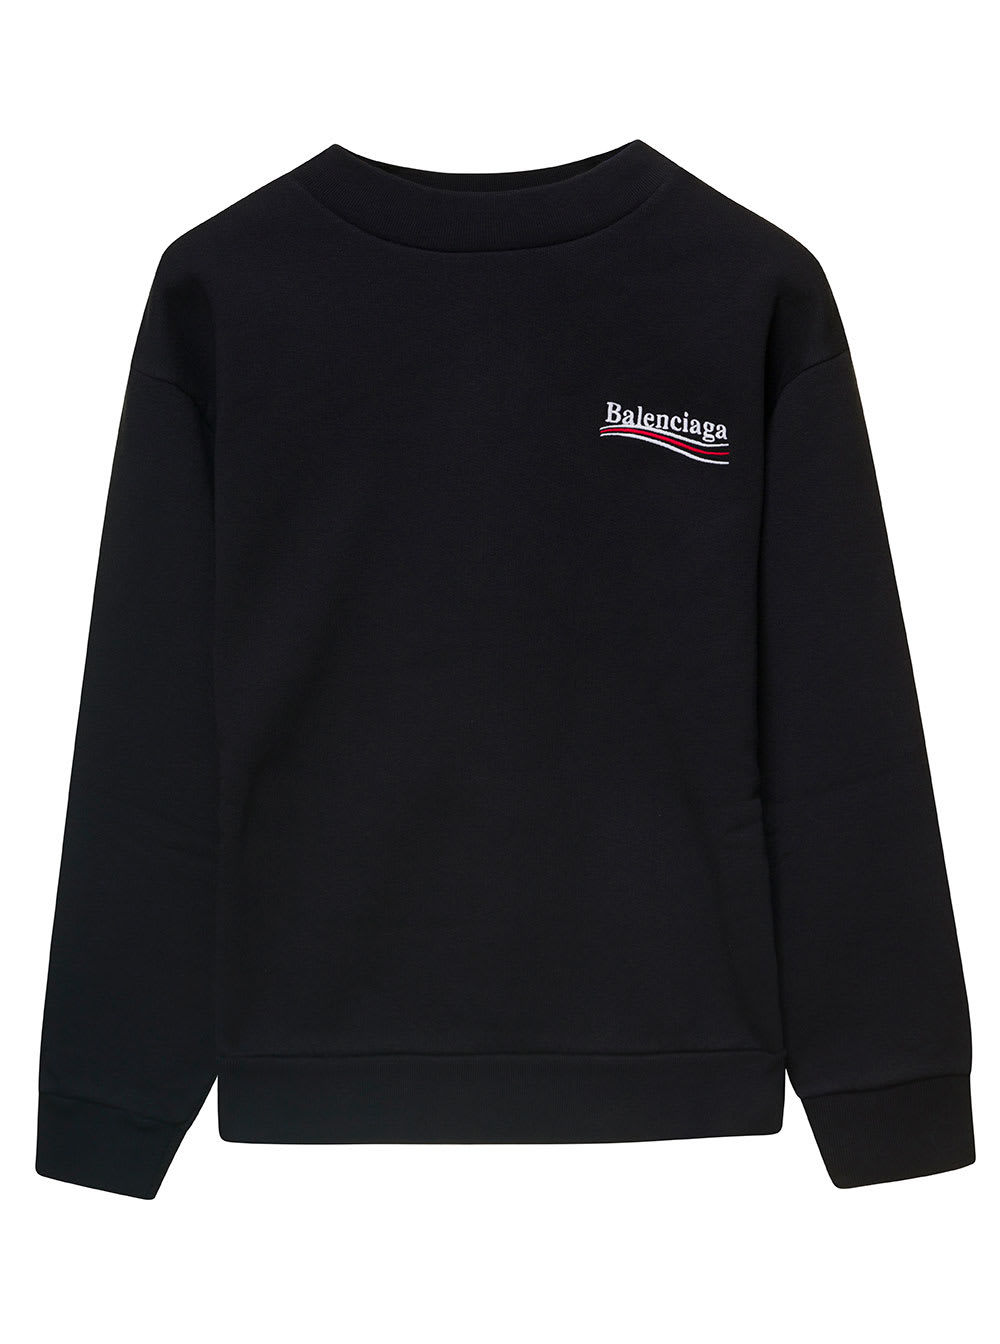 Balenciaga Black Crewneck Sweatshirt With Logo Print On The Front And Back In Cotton Boy